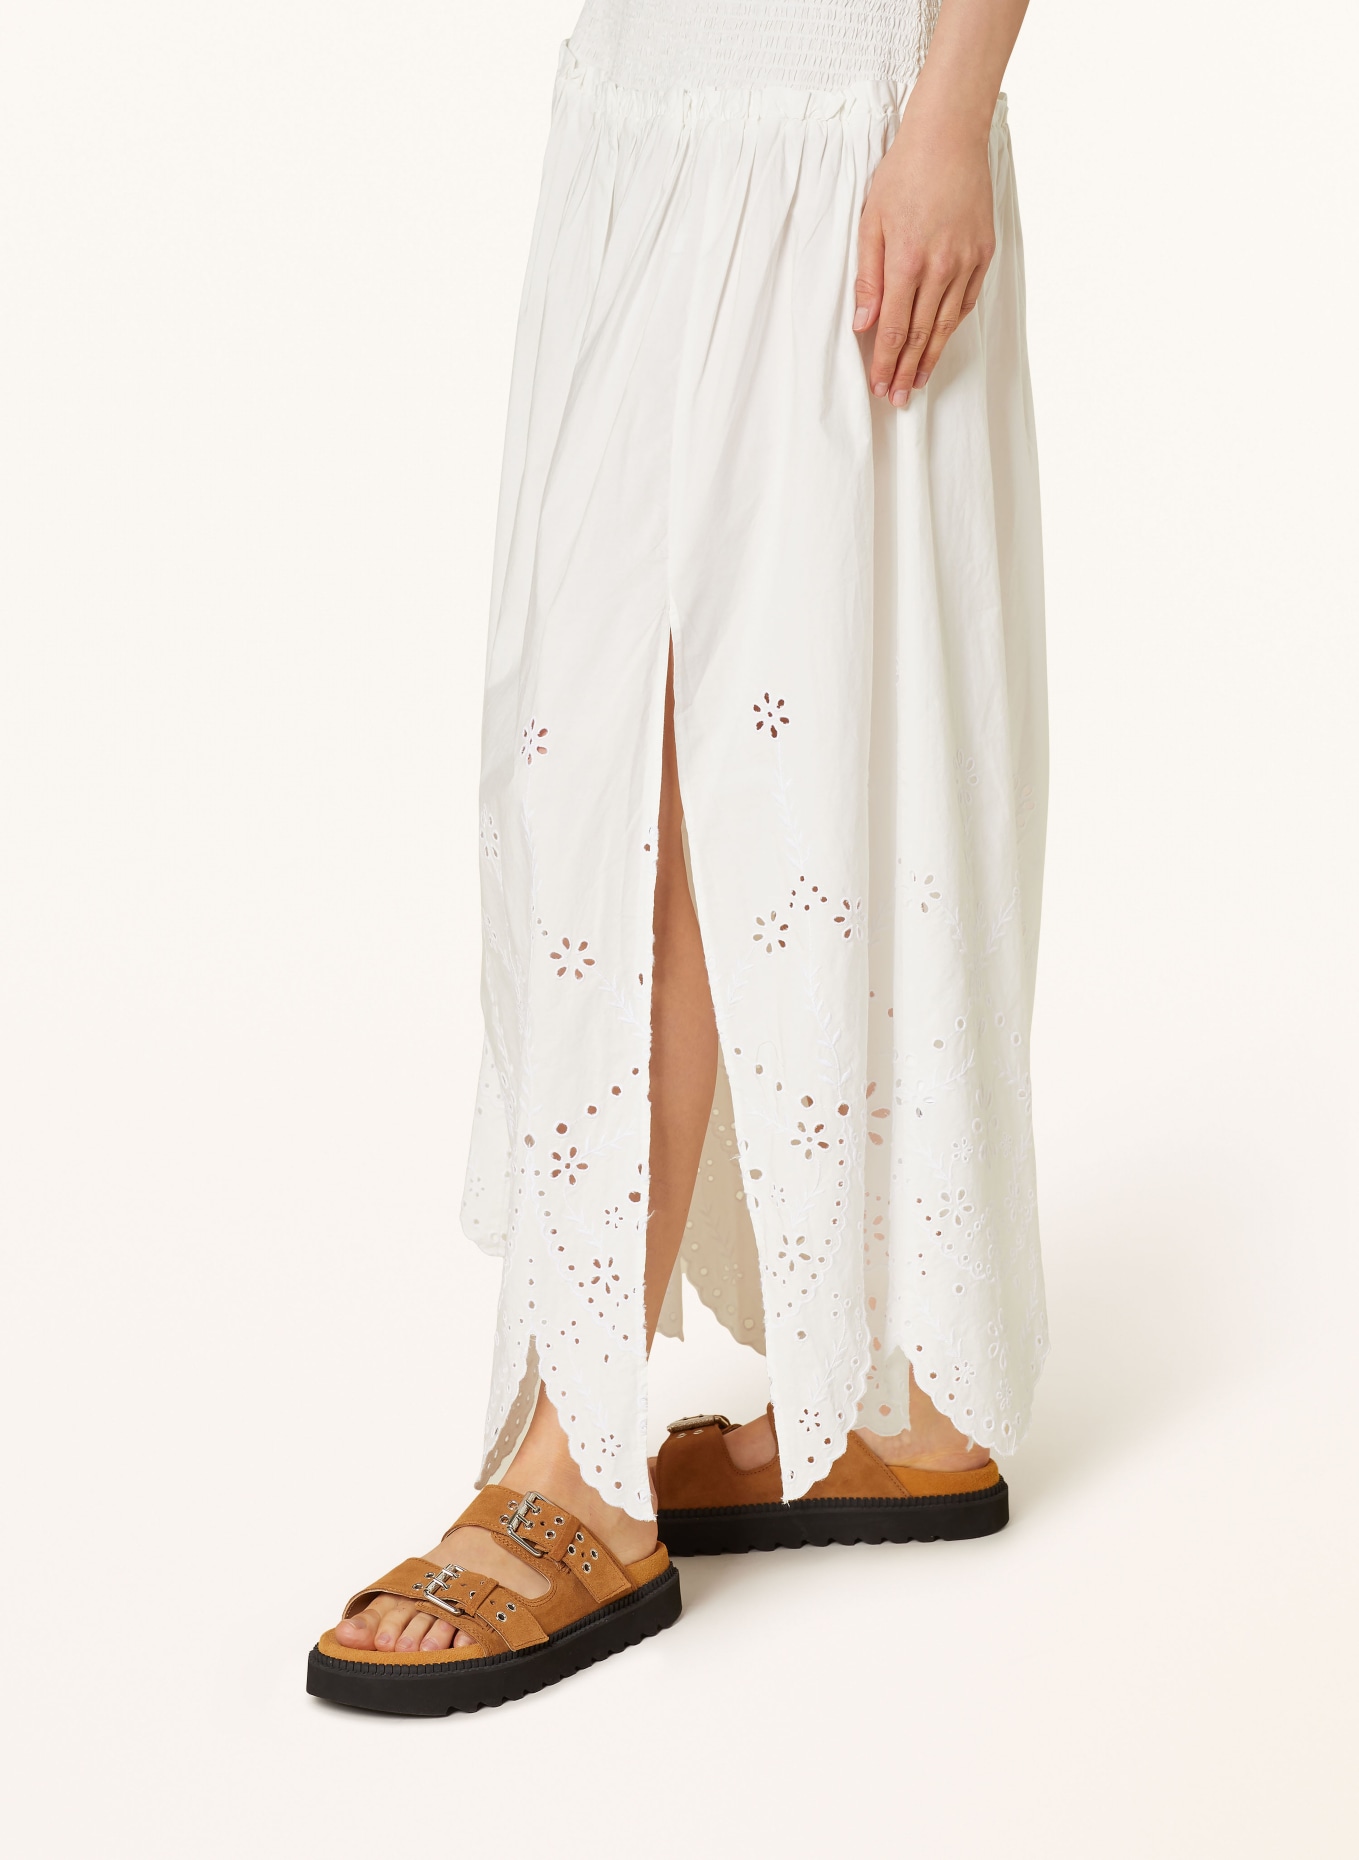 ALLSAINTS Skirt ALEX made of broderie anglaise, Color: 203 Off White (Image 4)